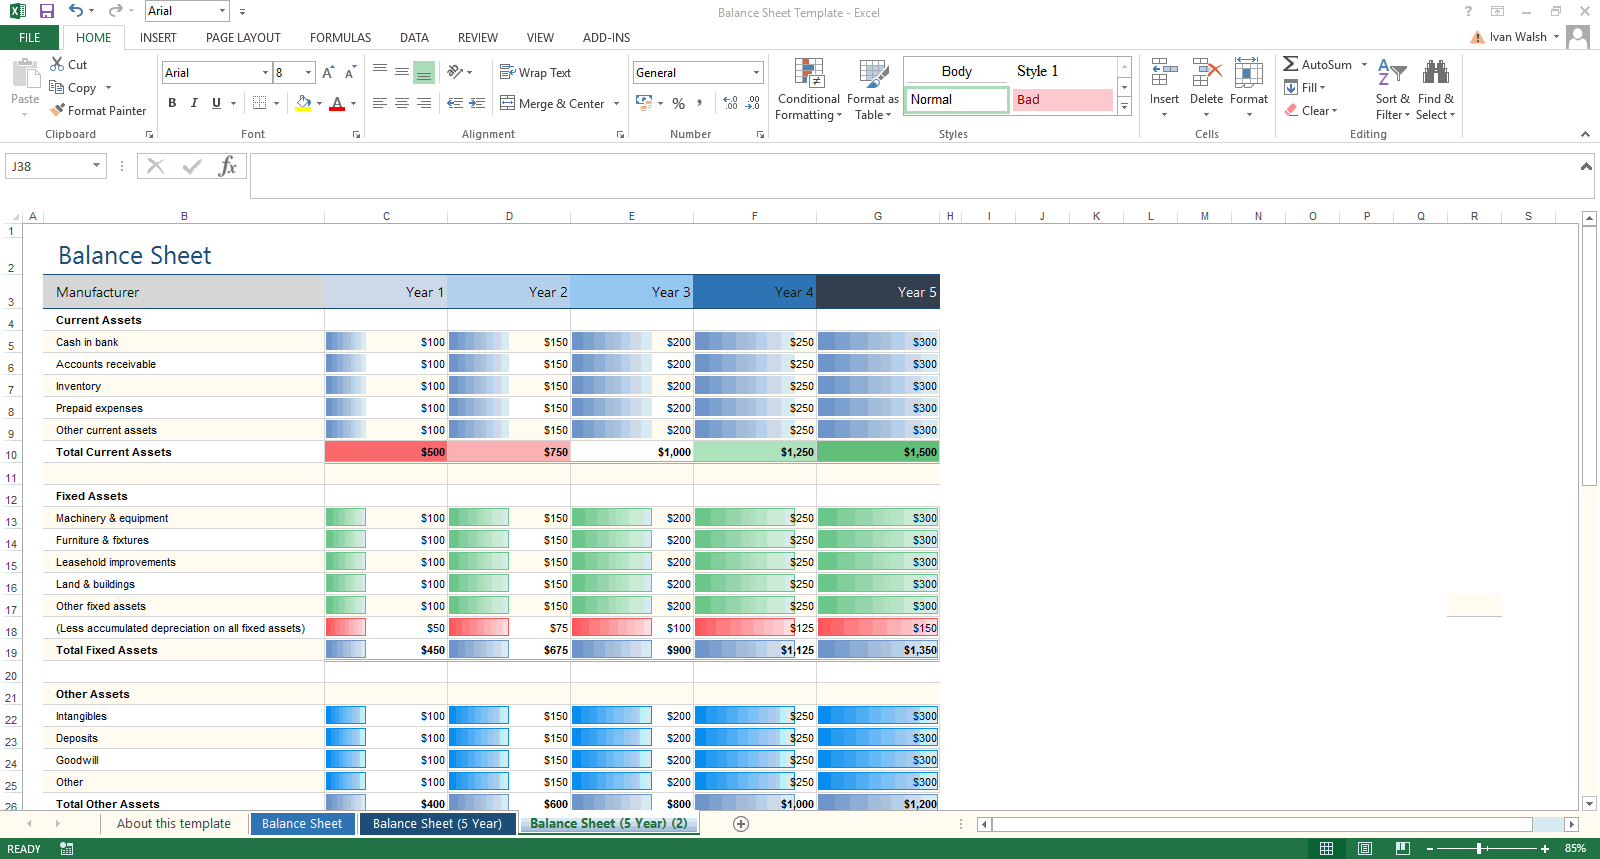 Projected Balance Sheet For 5 Years In Excel Format